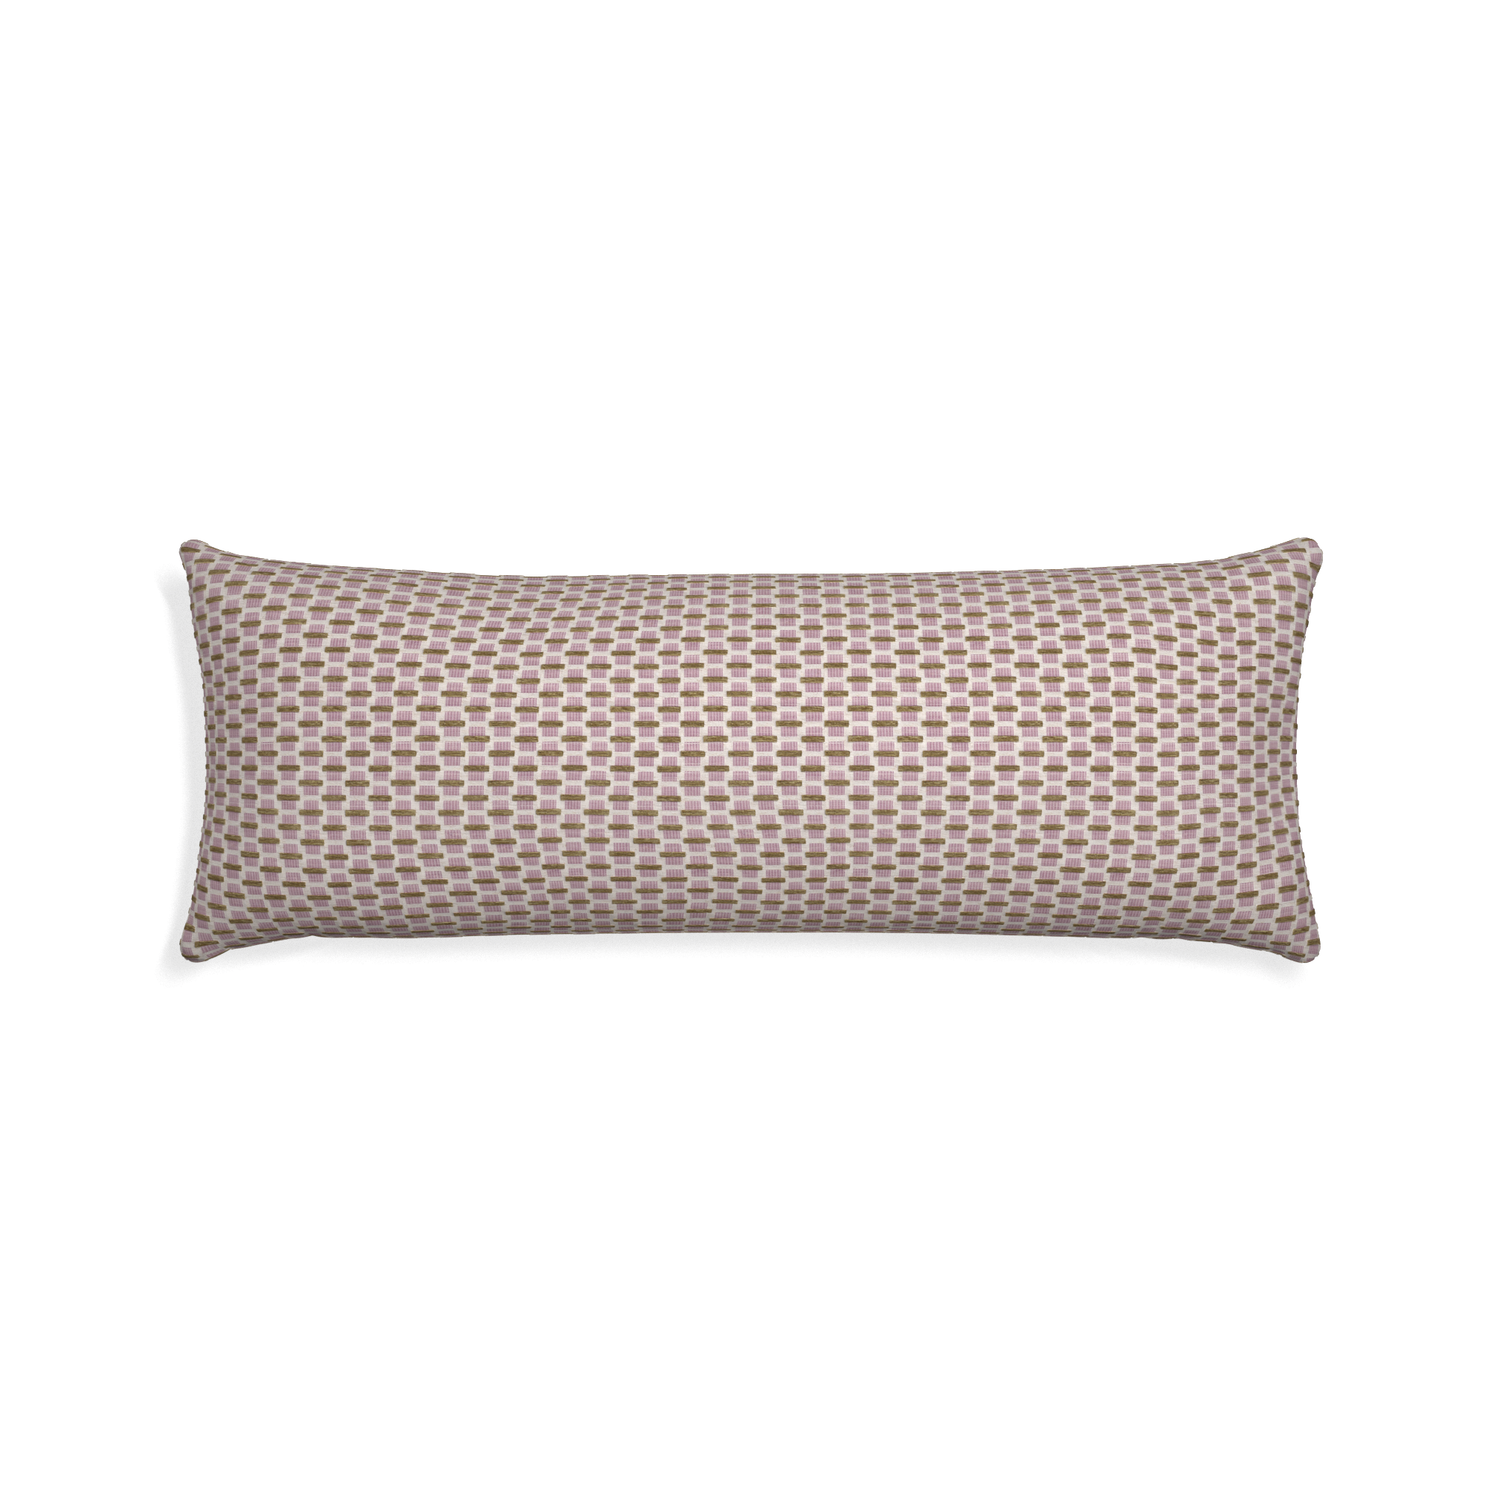 Xl-lumbar willow orchid custom pink geometric chenillepillow with none on white background